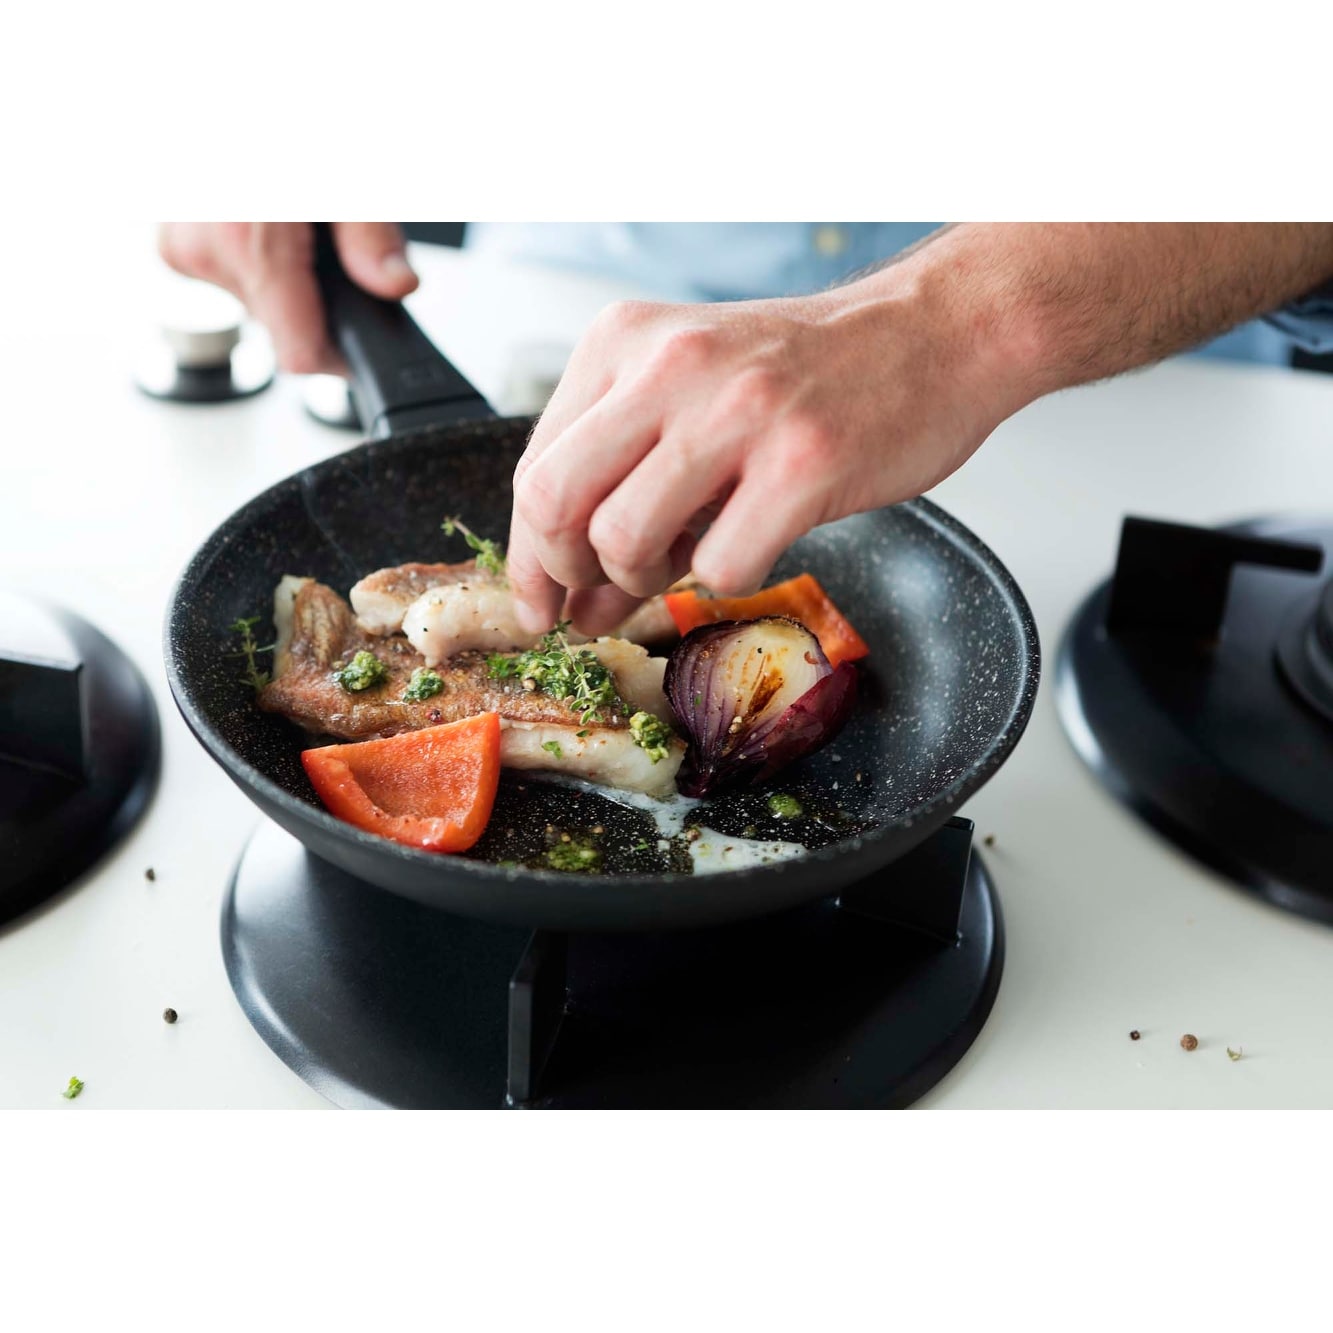 Zwilling Madura Plus Forged Aluminum Nonstick Fry Pan : Target